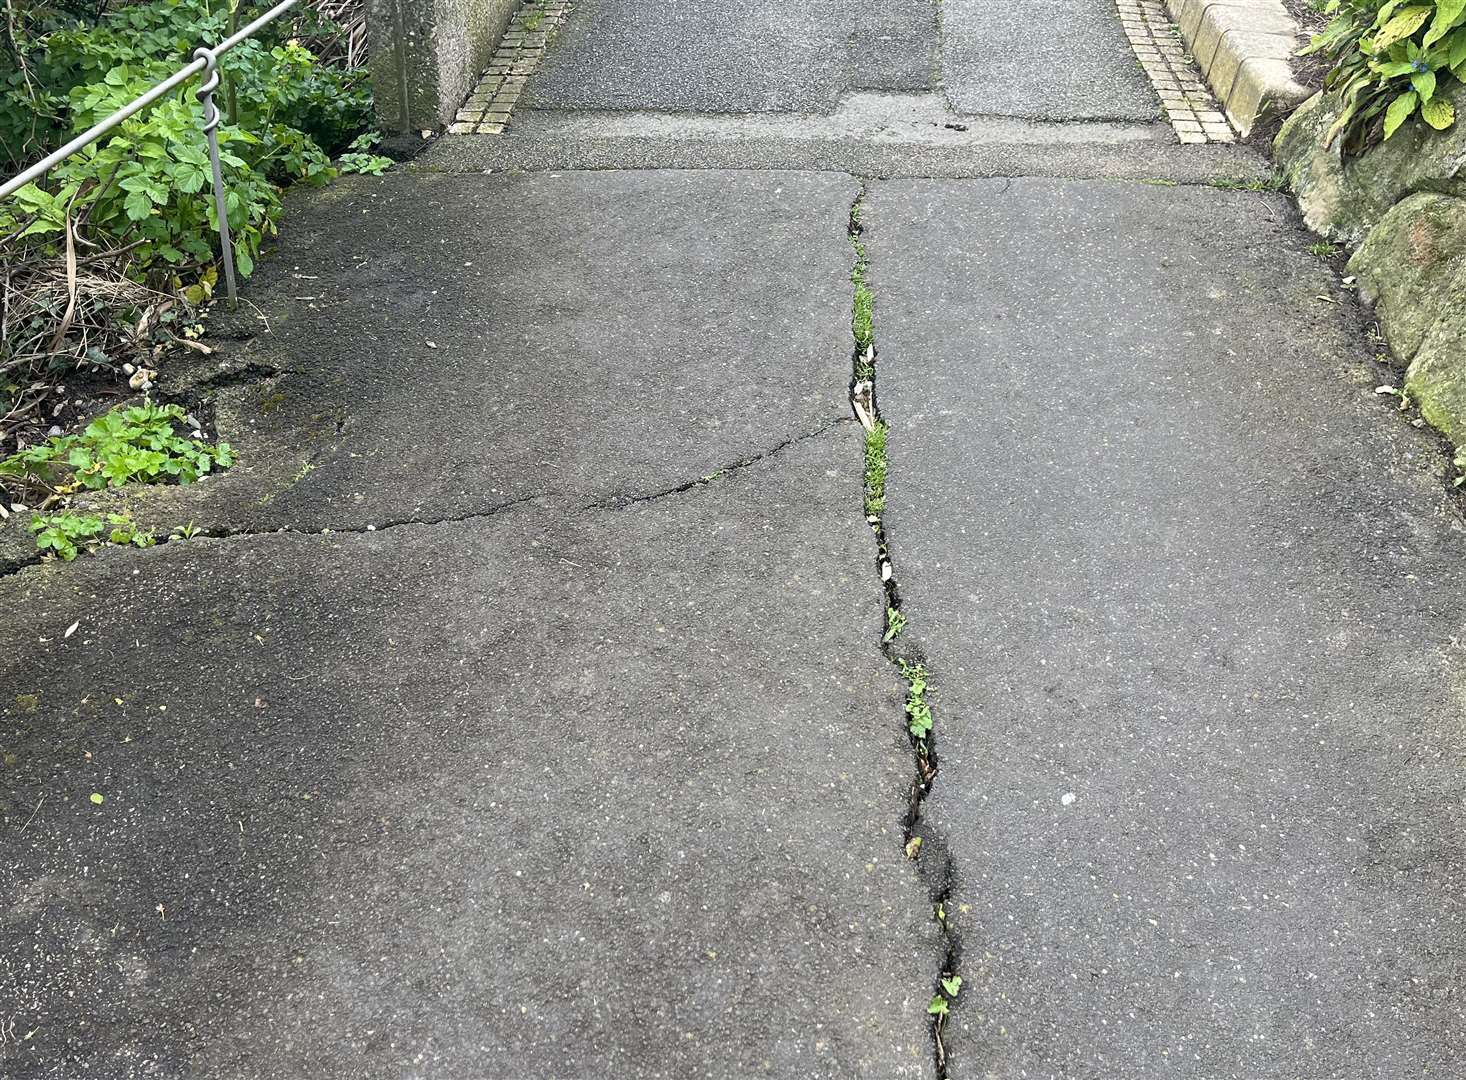 Cracks have been prominent along the Zig Zag Path in Folkestone but the trees along the path have been cause for greater concern